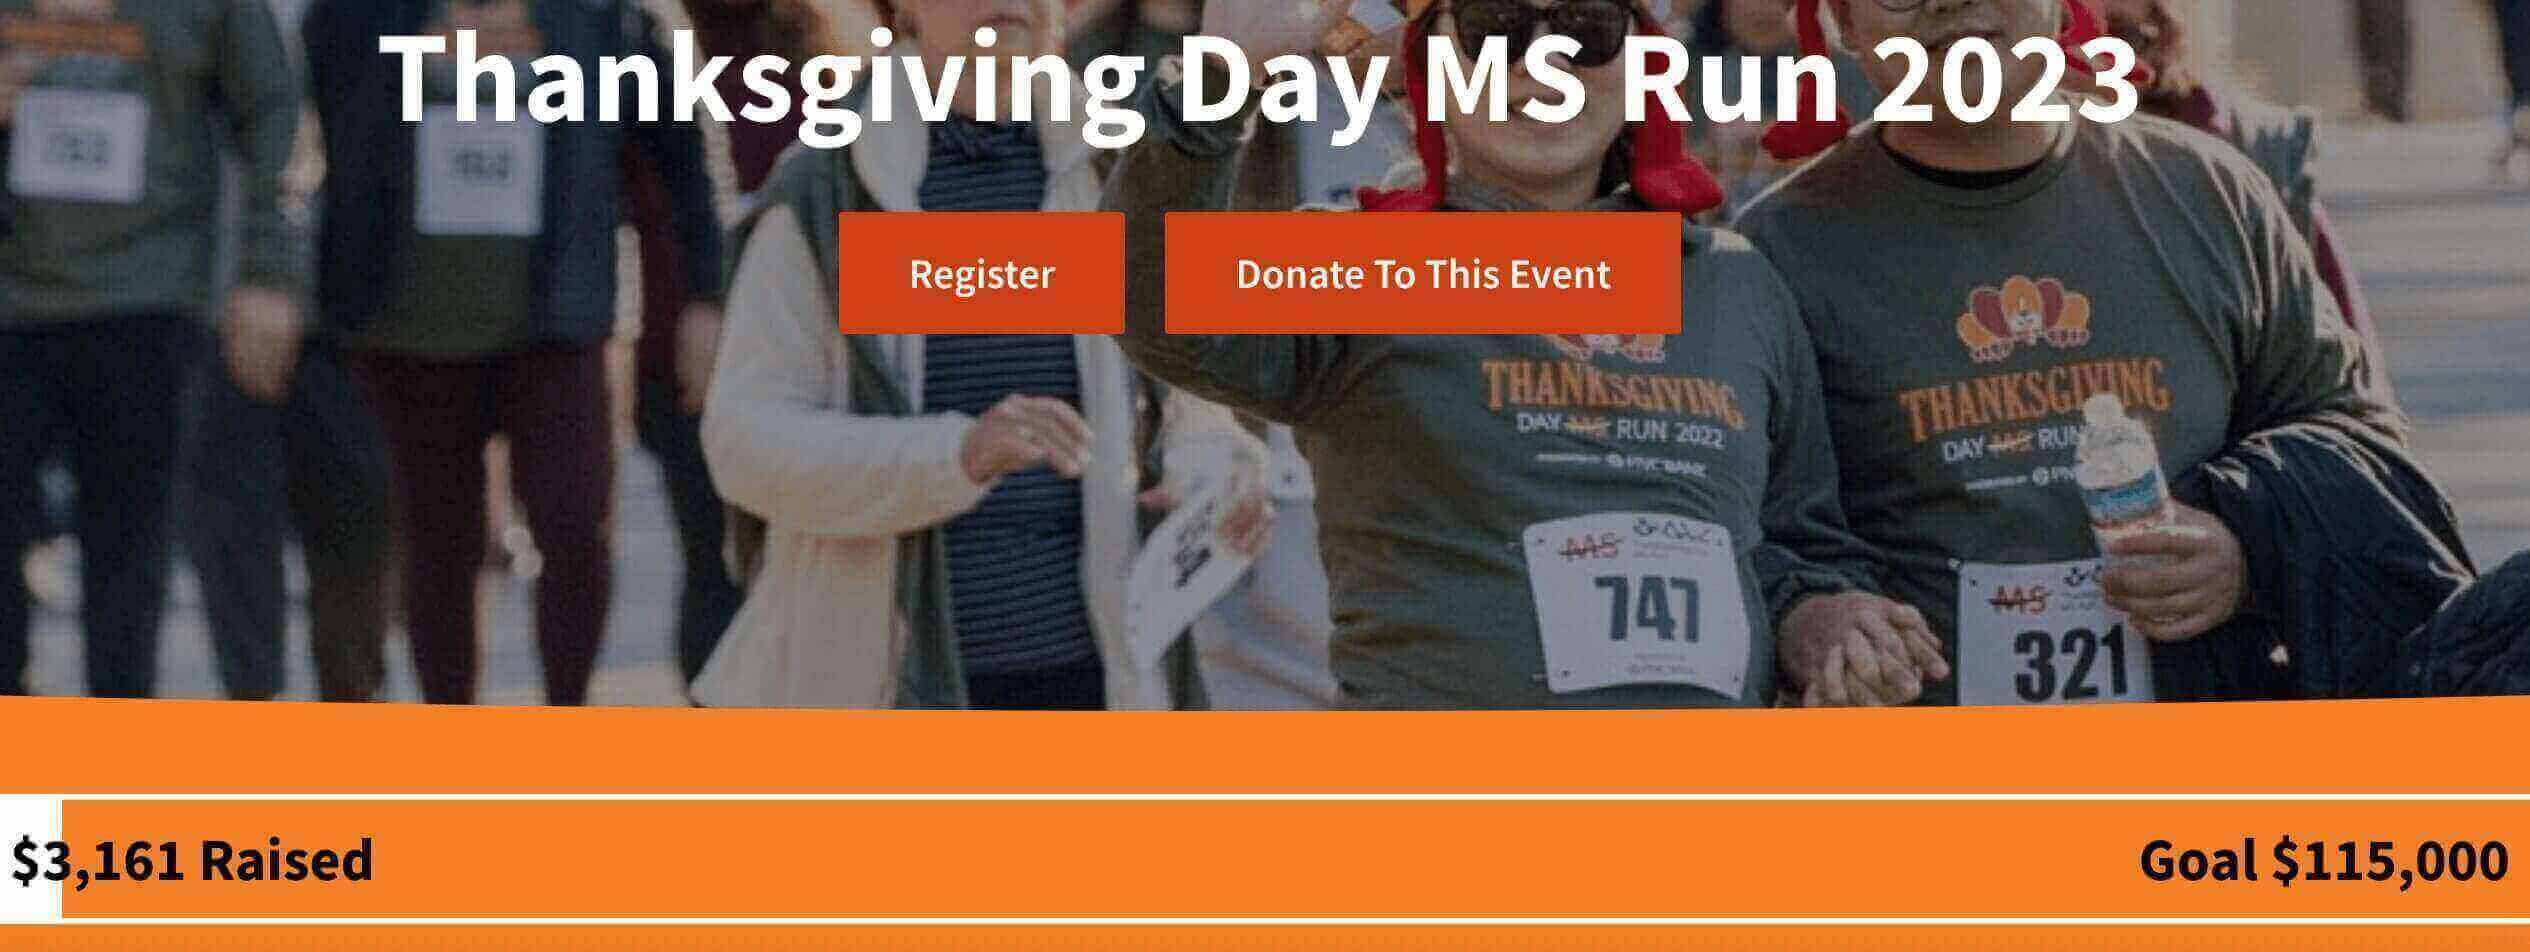 Thanksgiving event registration page 